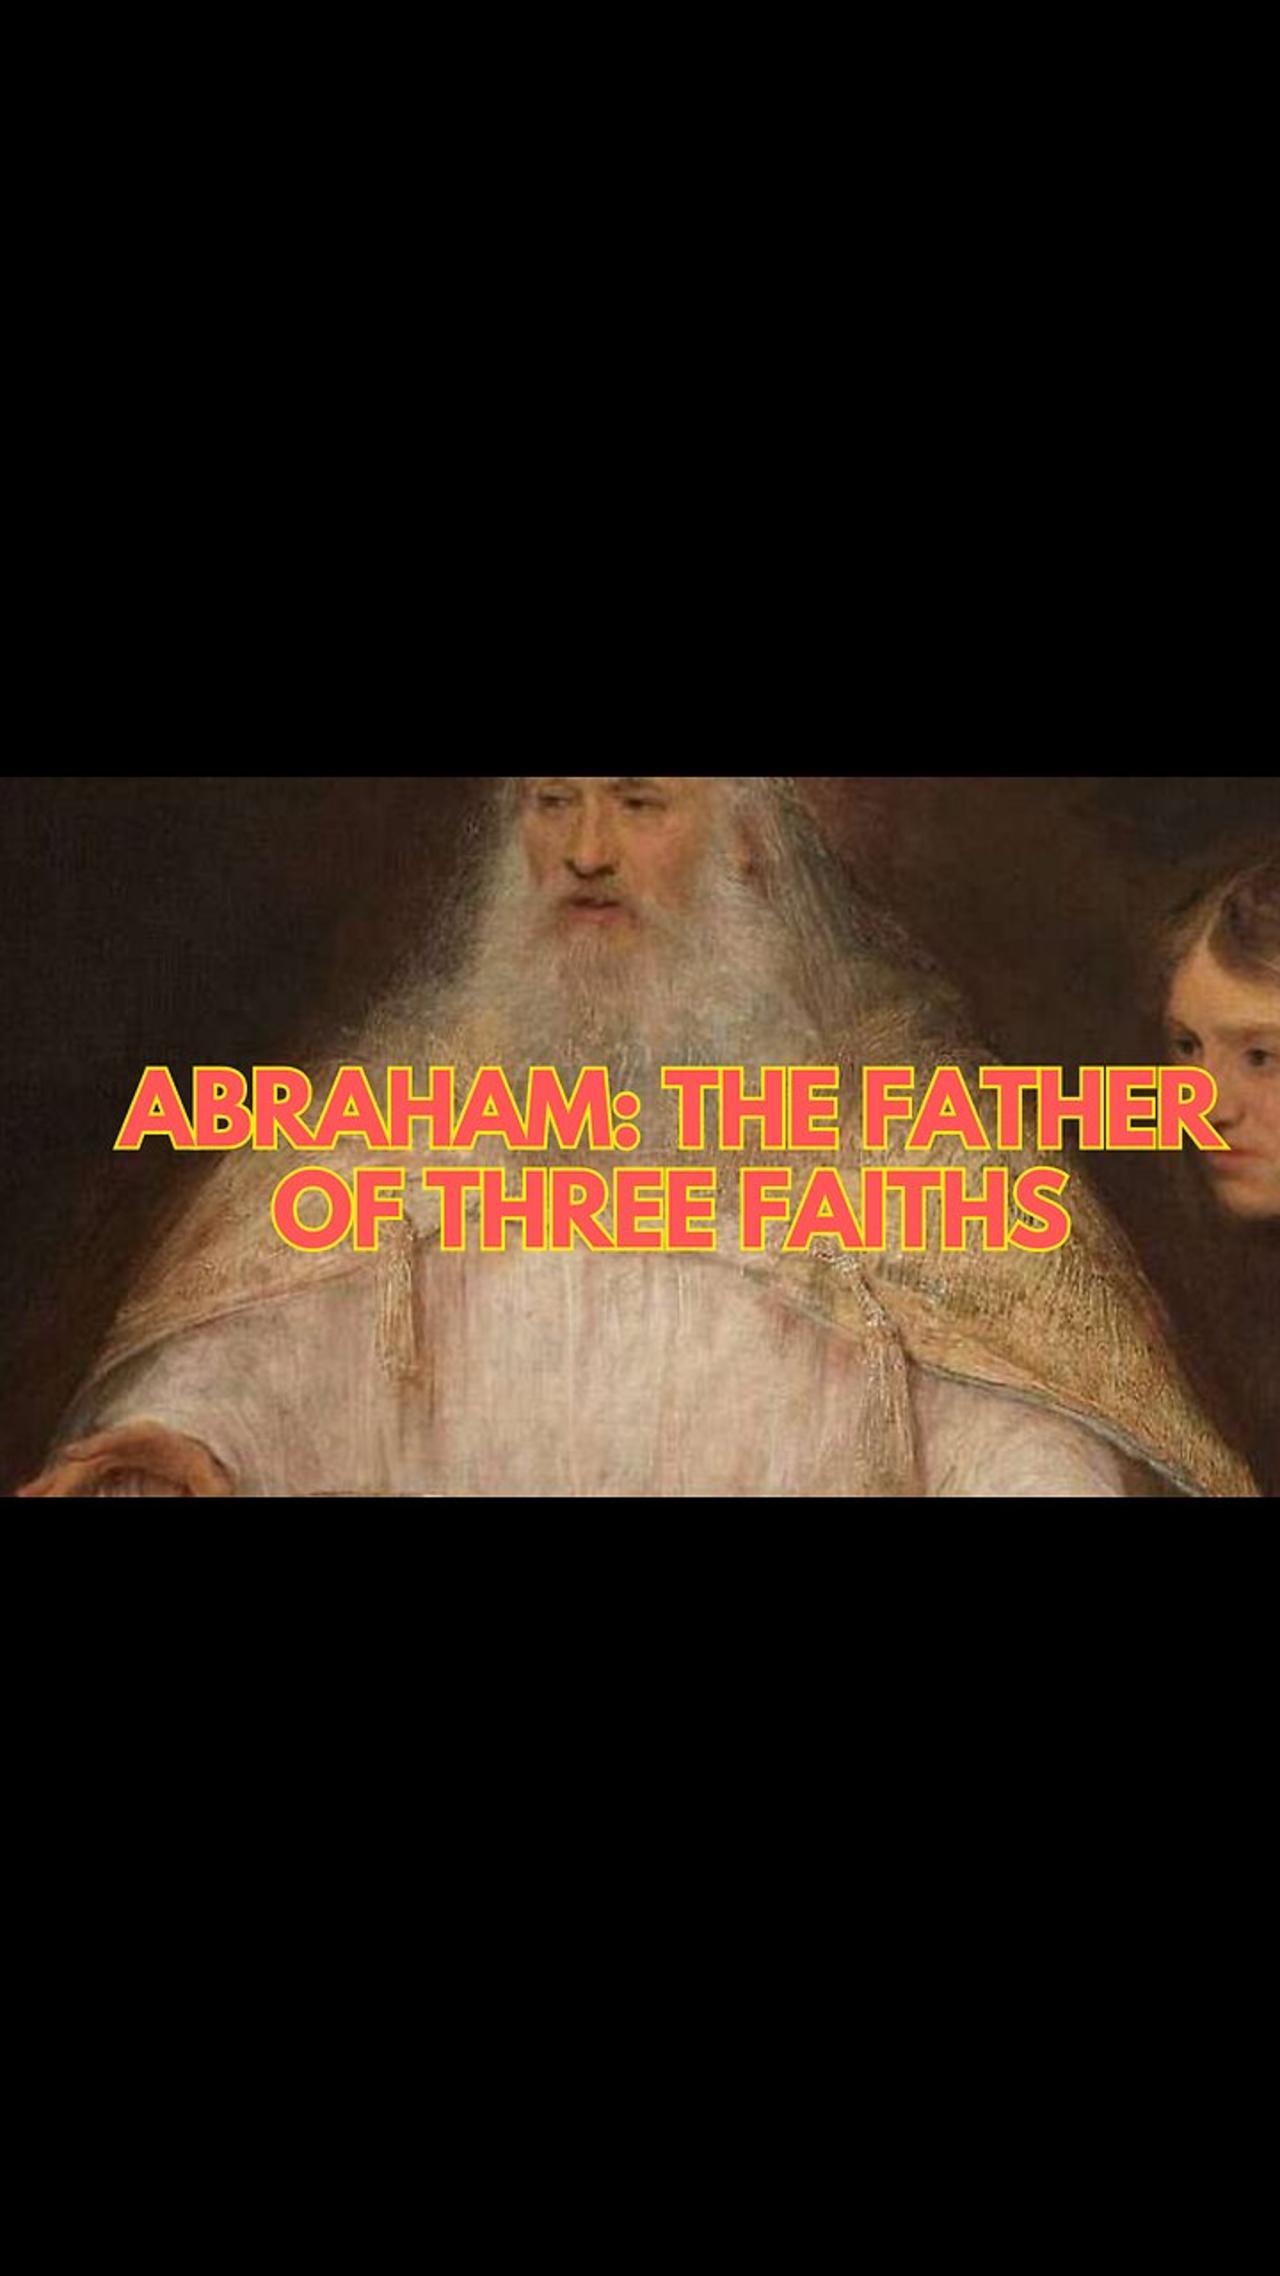 Abraham: The Father of Three Faiths